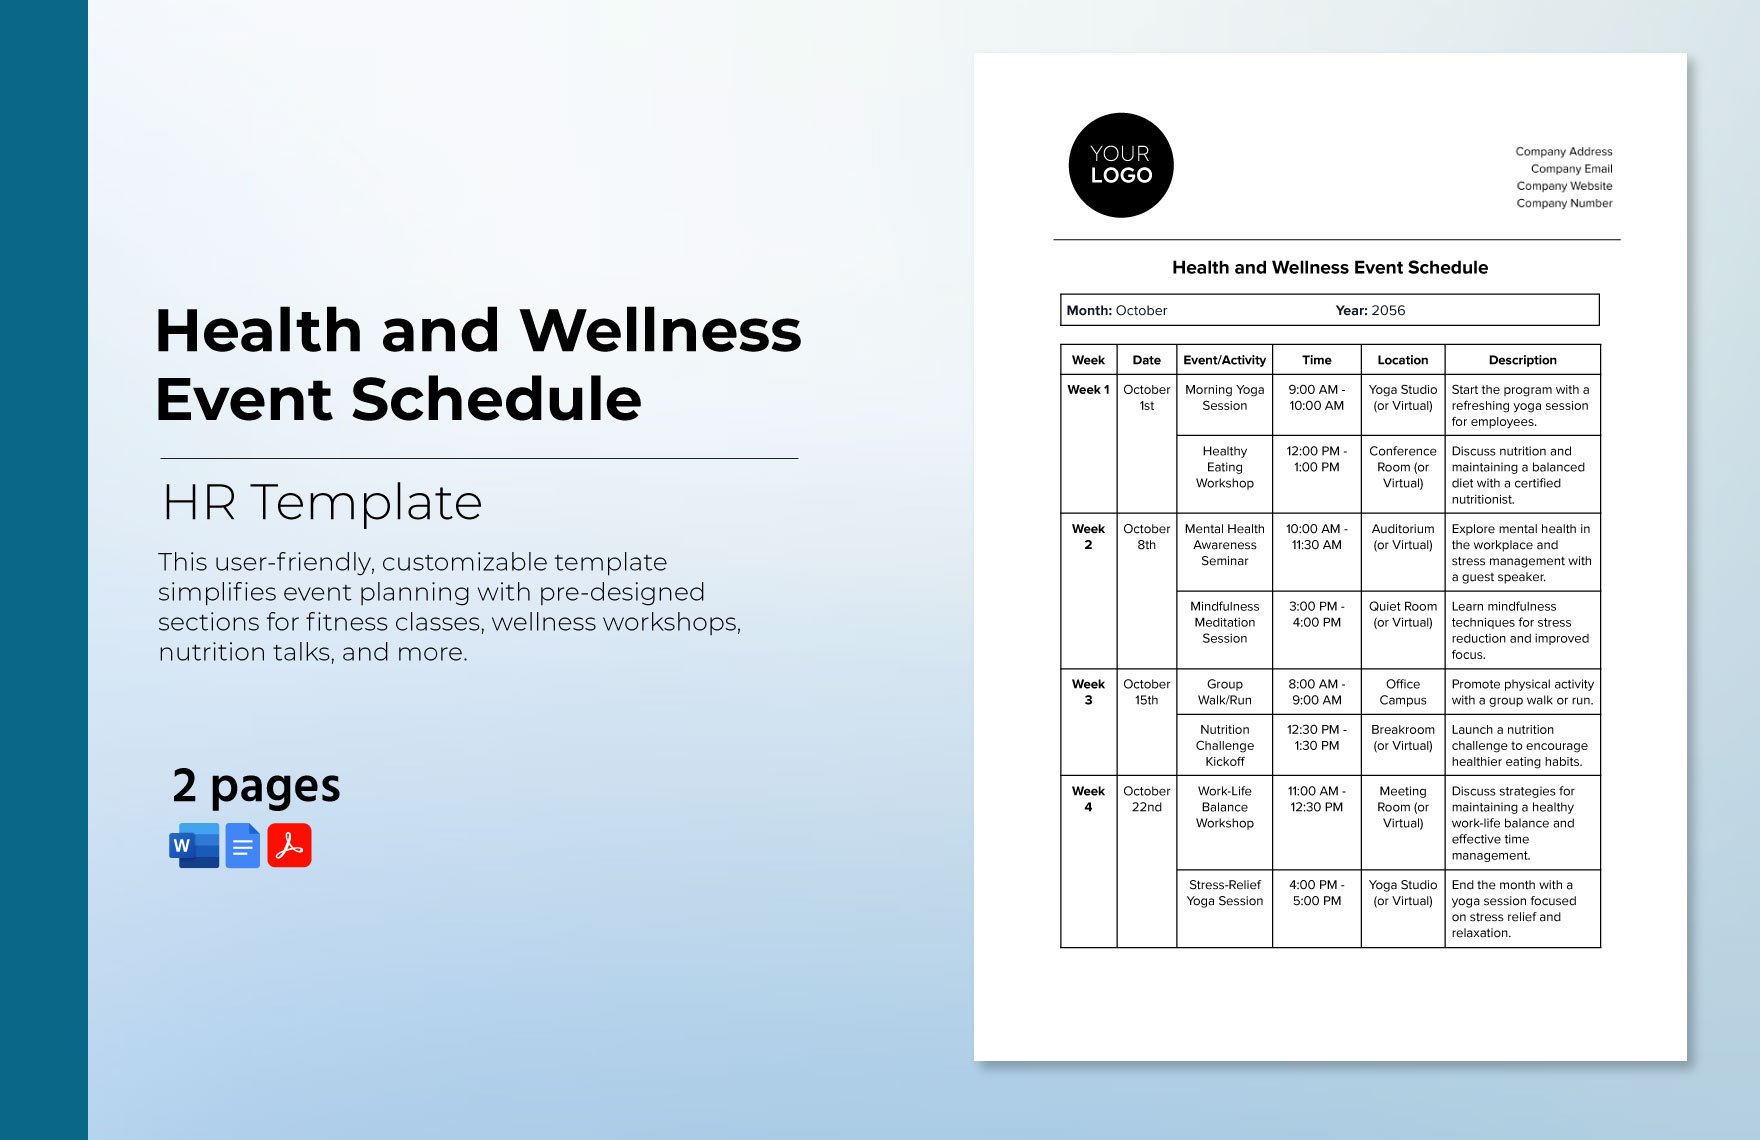 Health and Wellness Event Schedule HR Template